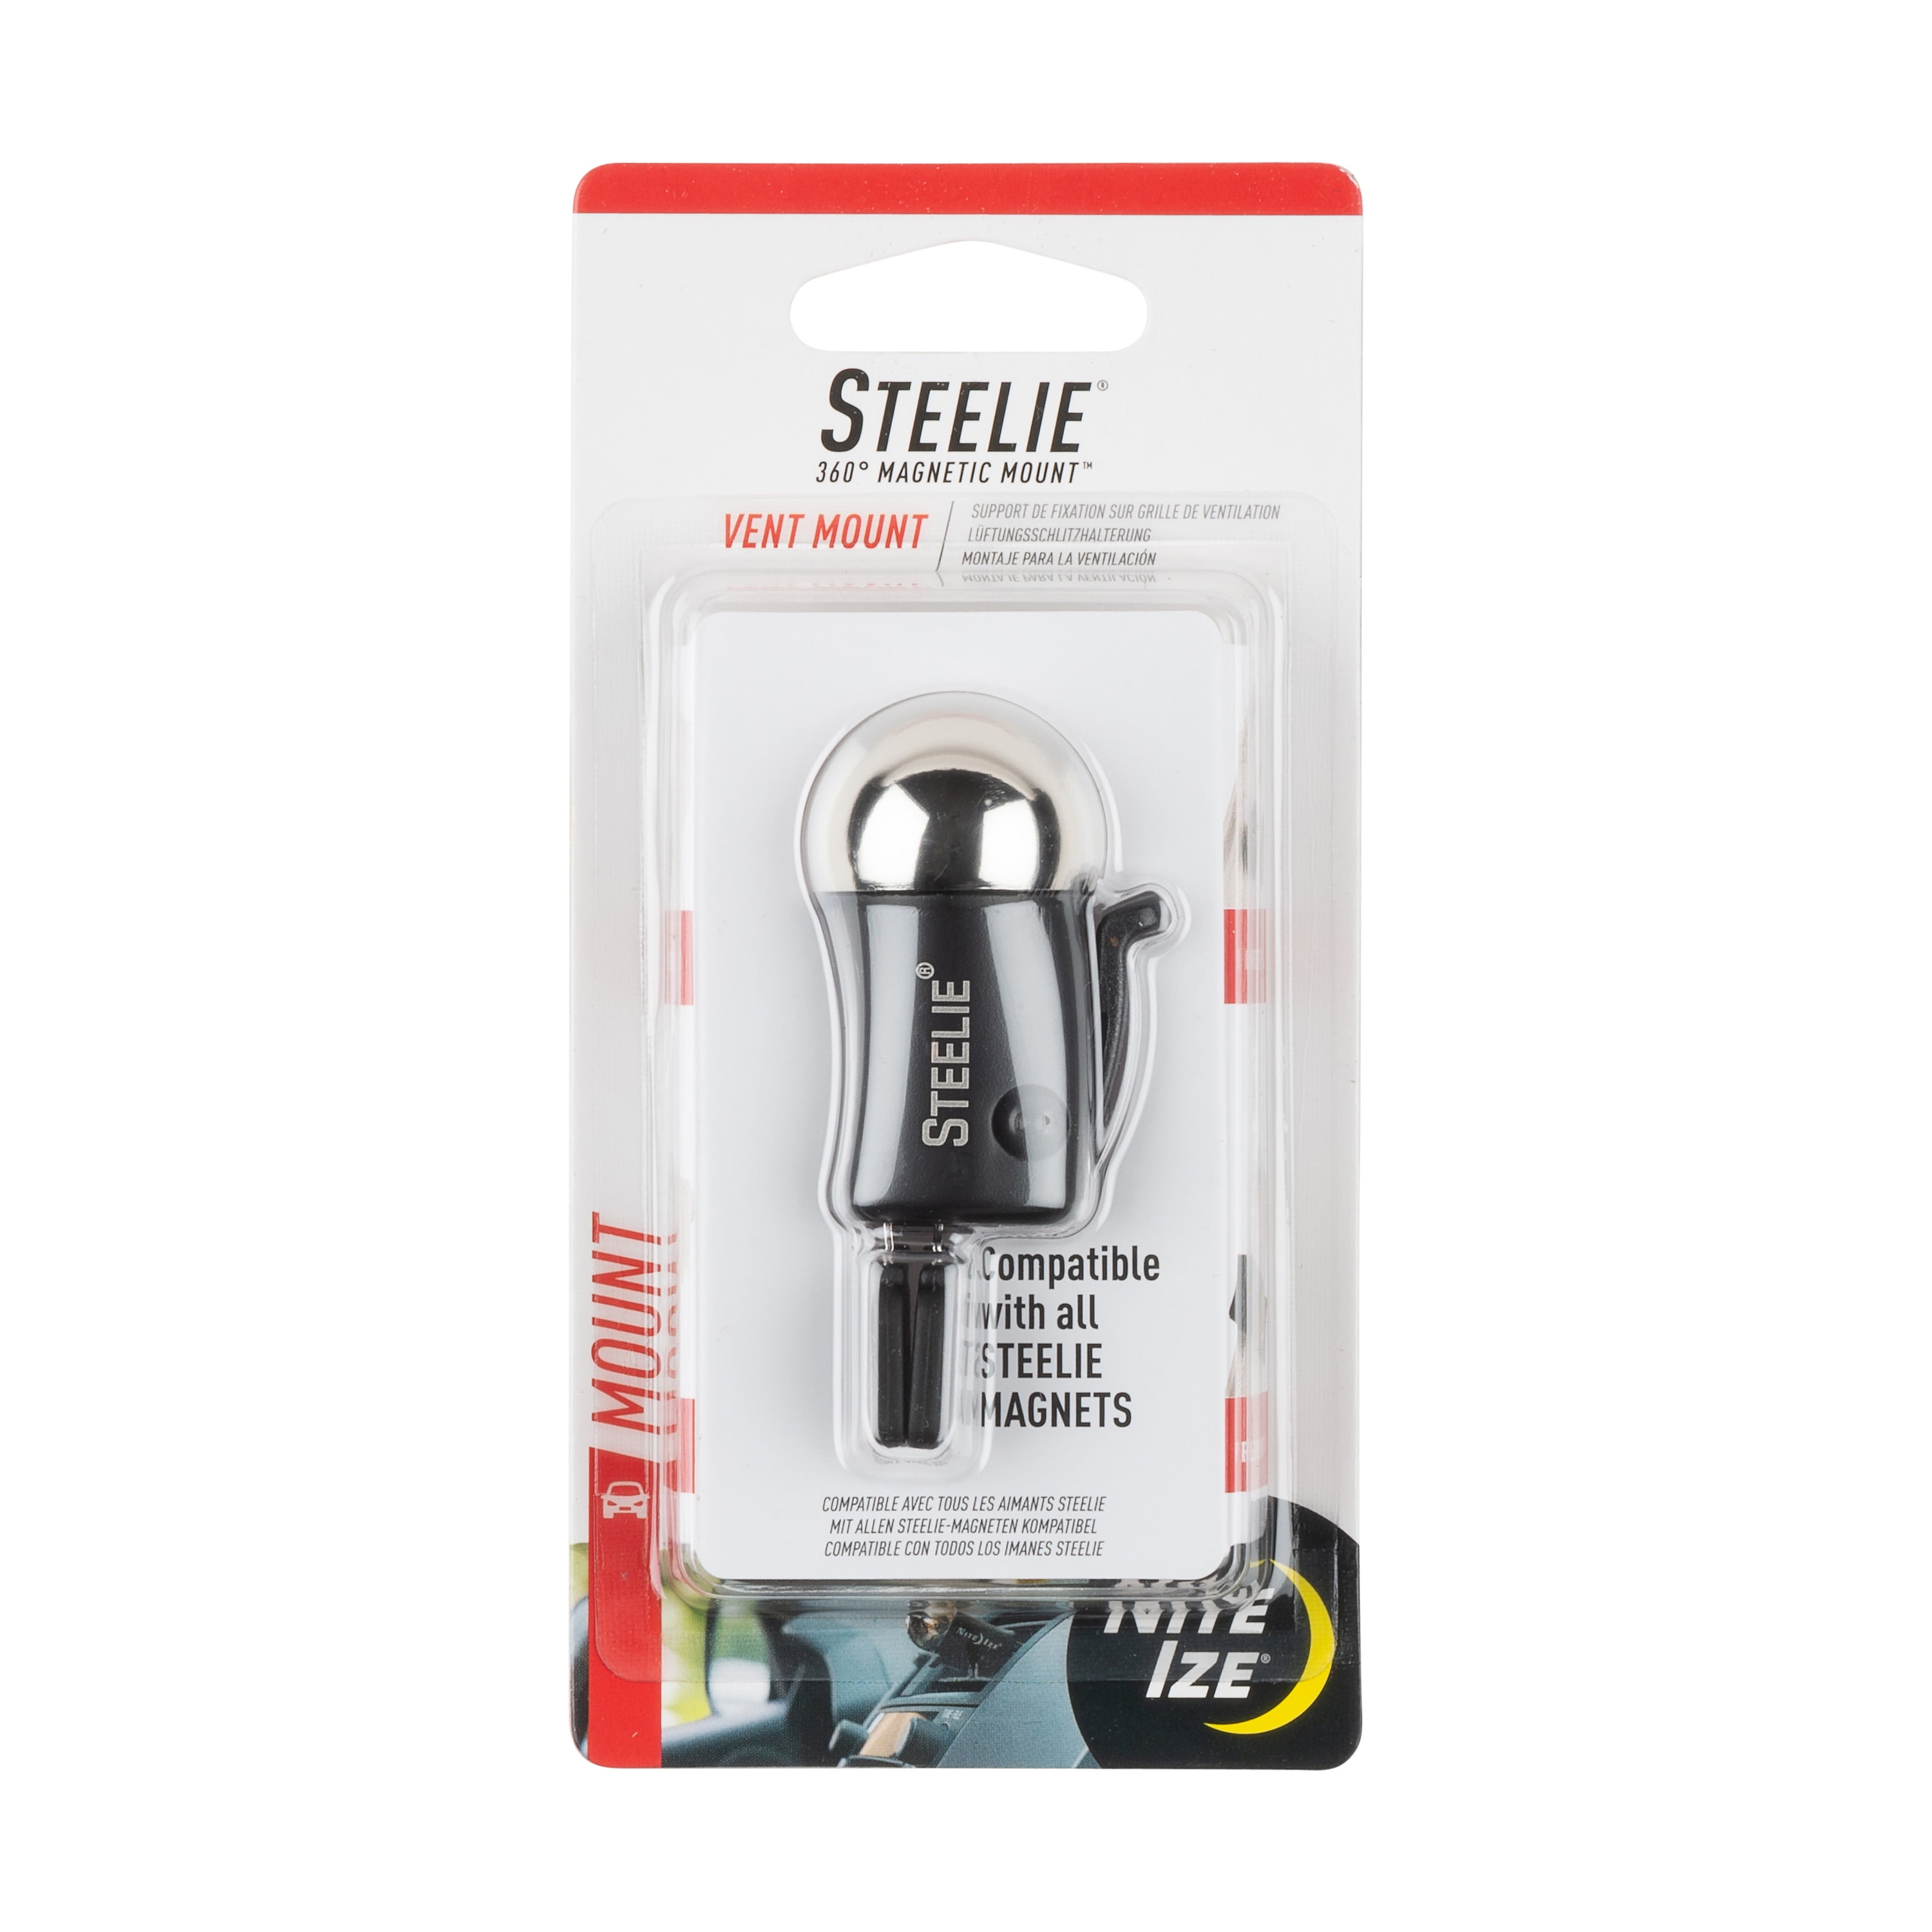 Nite Ize Steelie Car Mount Kit at Tractor Supply Co.